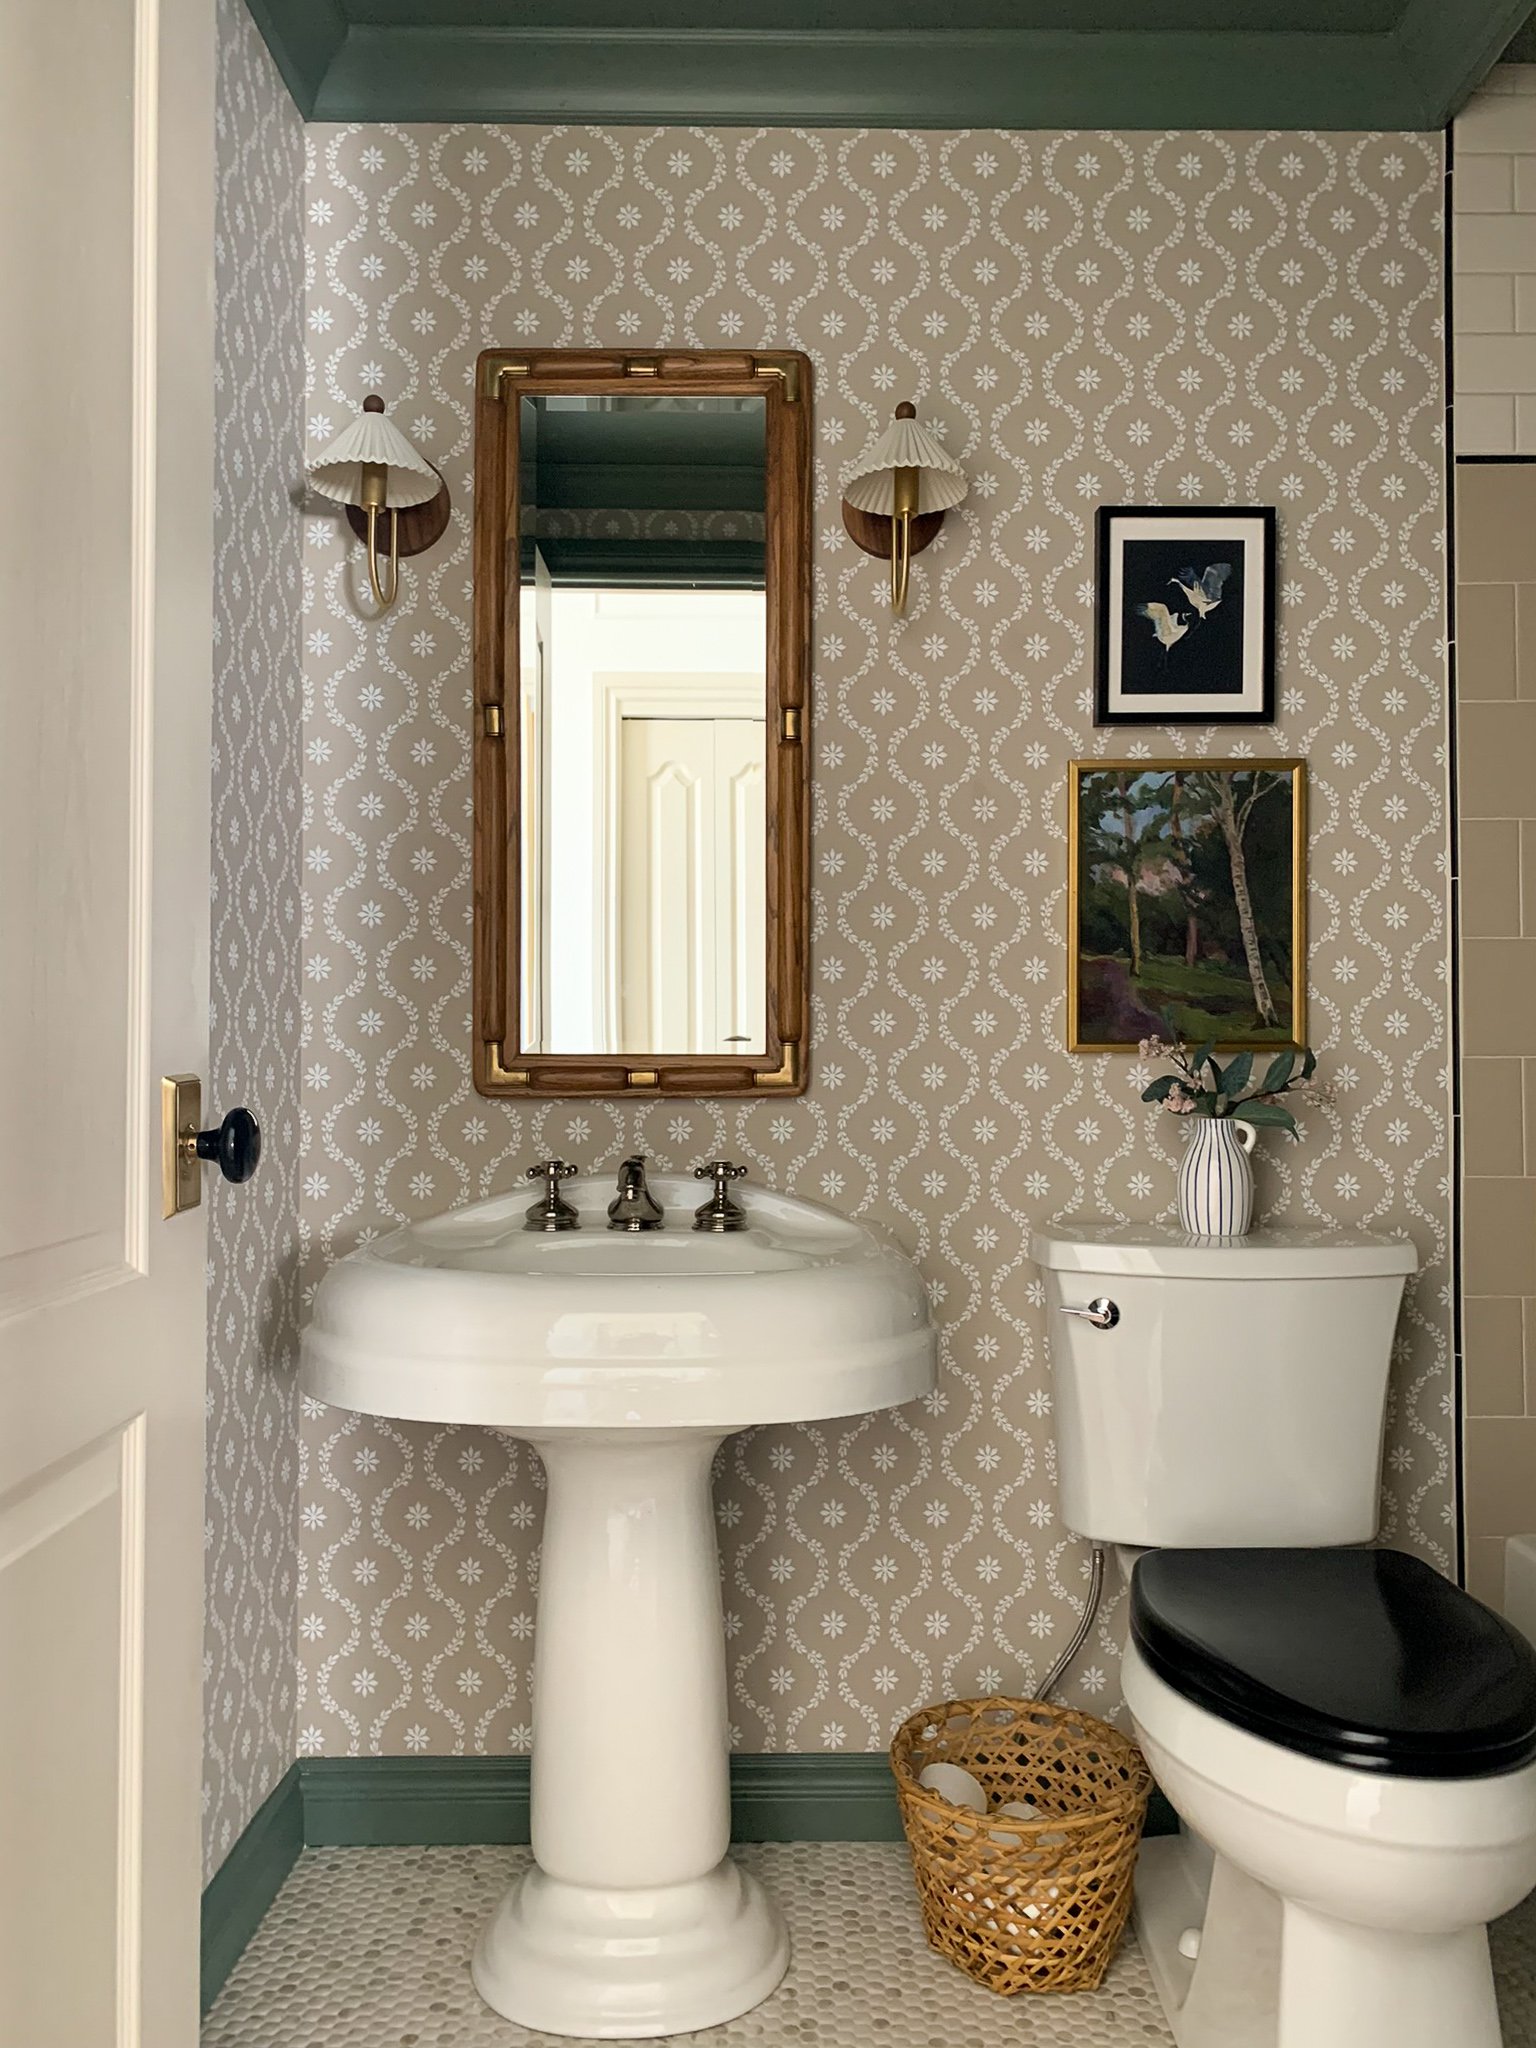 The Modern Traditional Guest Bathroom Reveal! -One Room Challenge Spring 2022